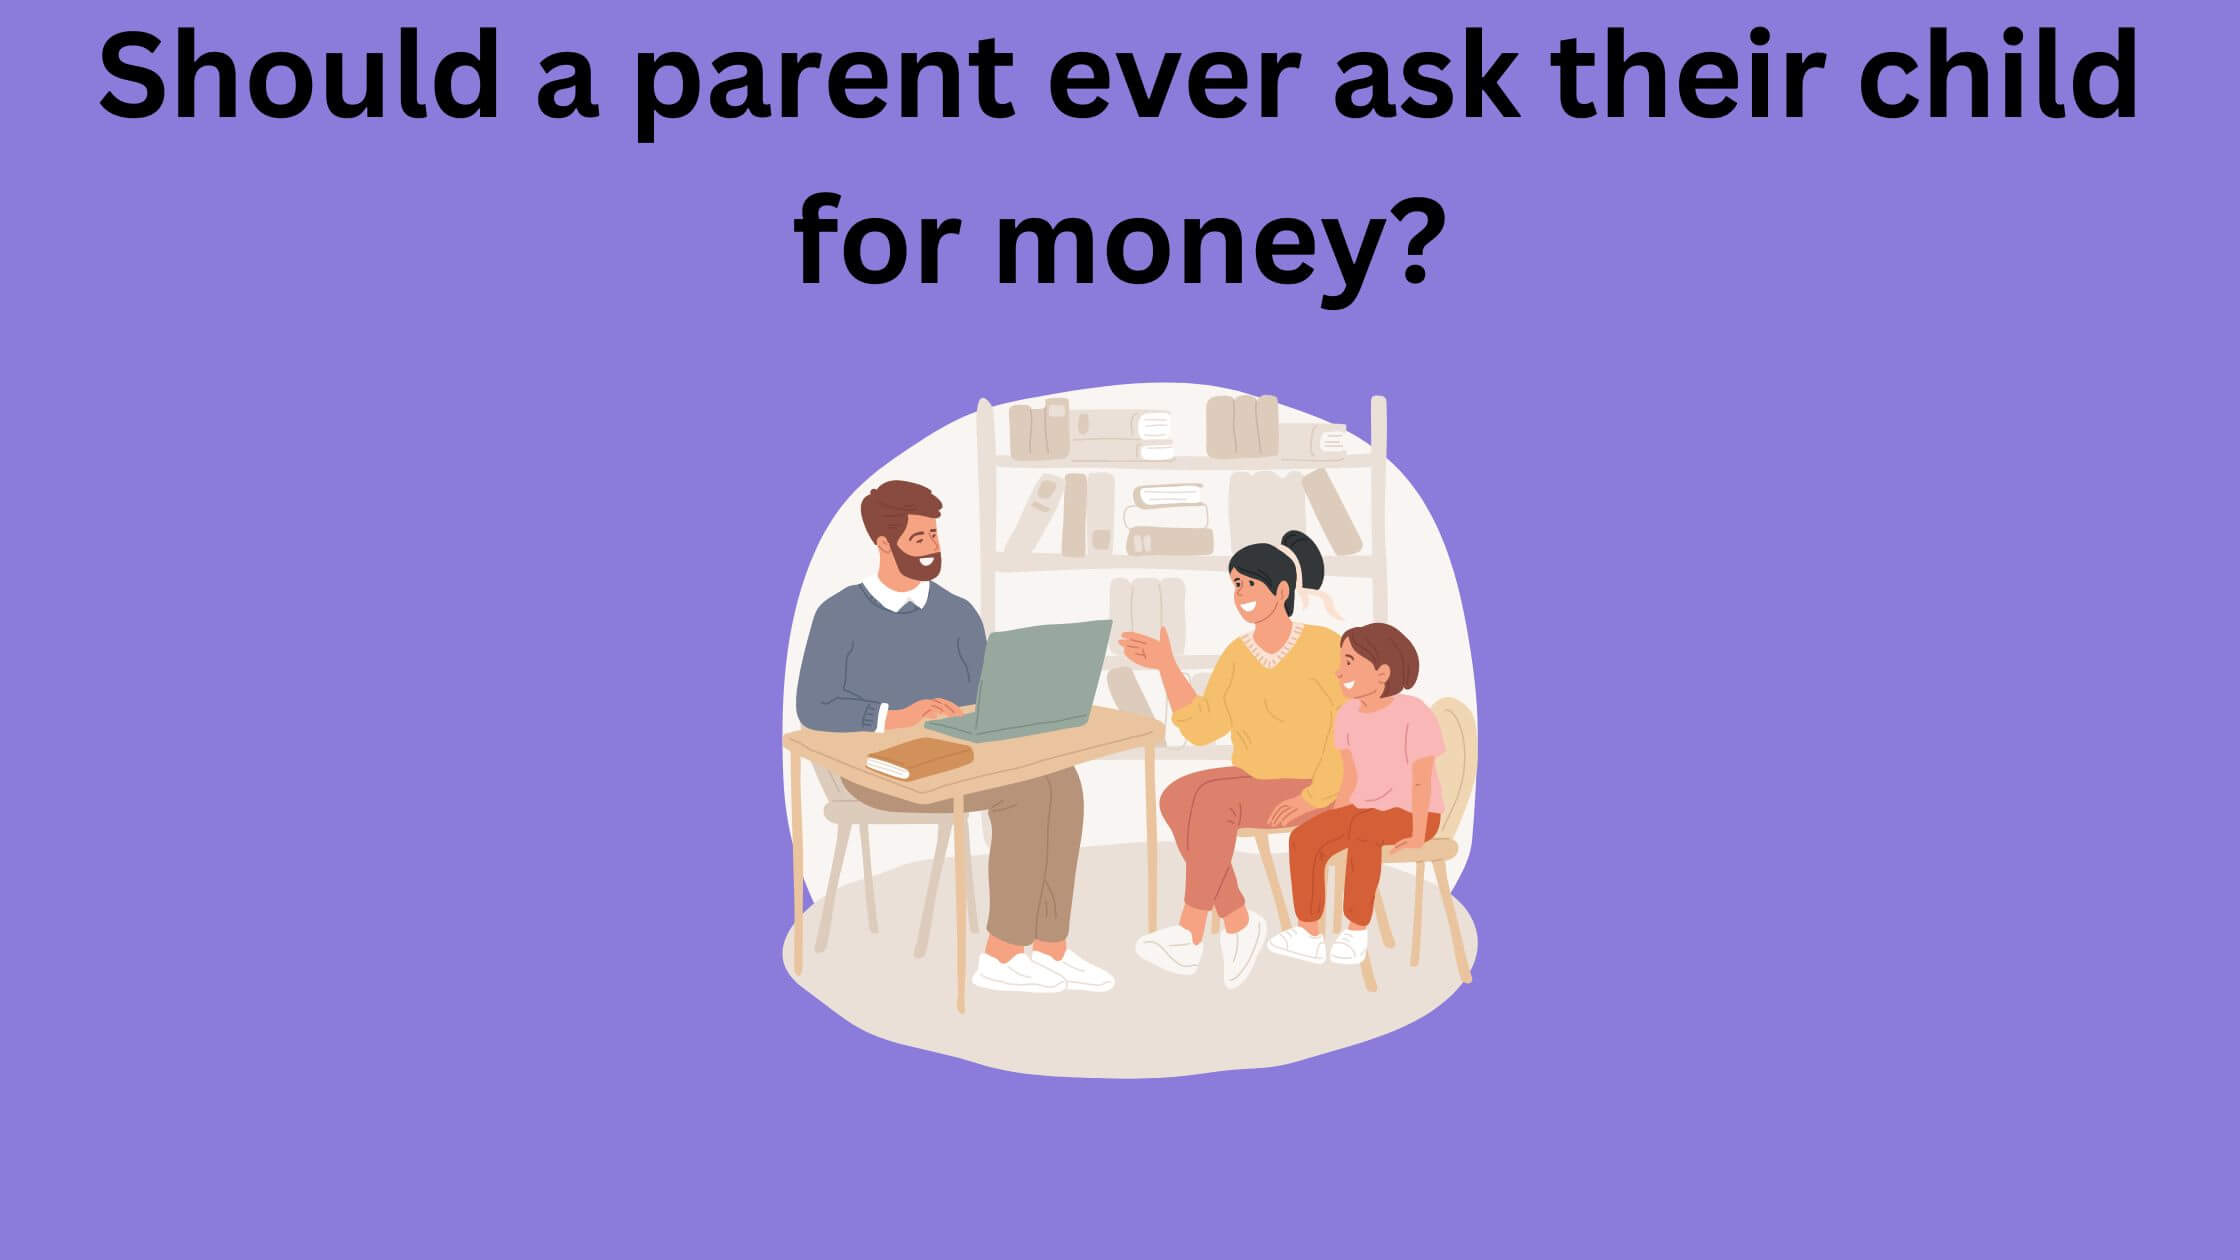 Should a parent ever ask their child for money?